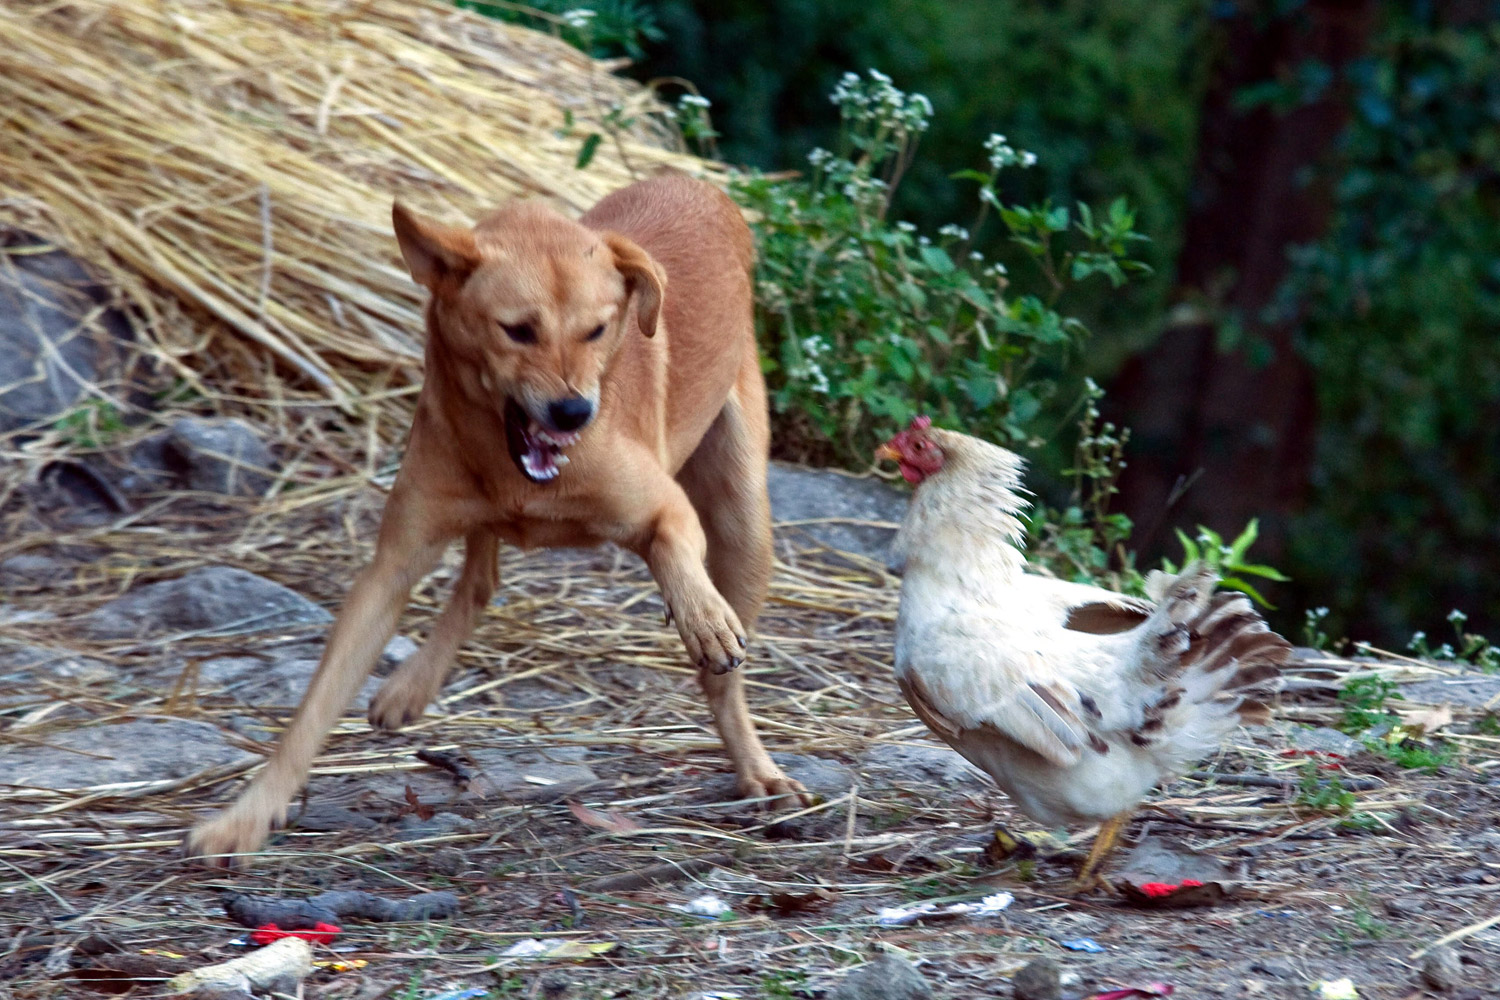 October 2011. A hen challenges a stray dog as it comes near to her sick poult before finally attacking the dog in defense of her offspring at Sundarijal village, some 13 Kilometer from capital Kathmandu, Nepal. The hen had four plouts the week before, but three died for unknown reason. She is now acting extremely protective to the poult left, her owner, farmer Sankar Shrestha said.